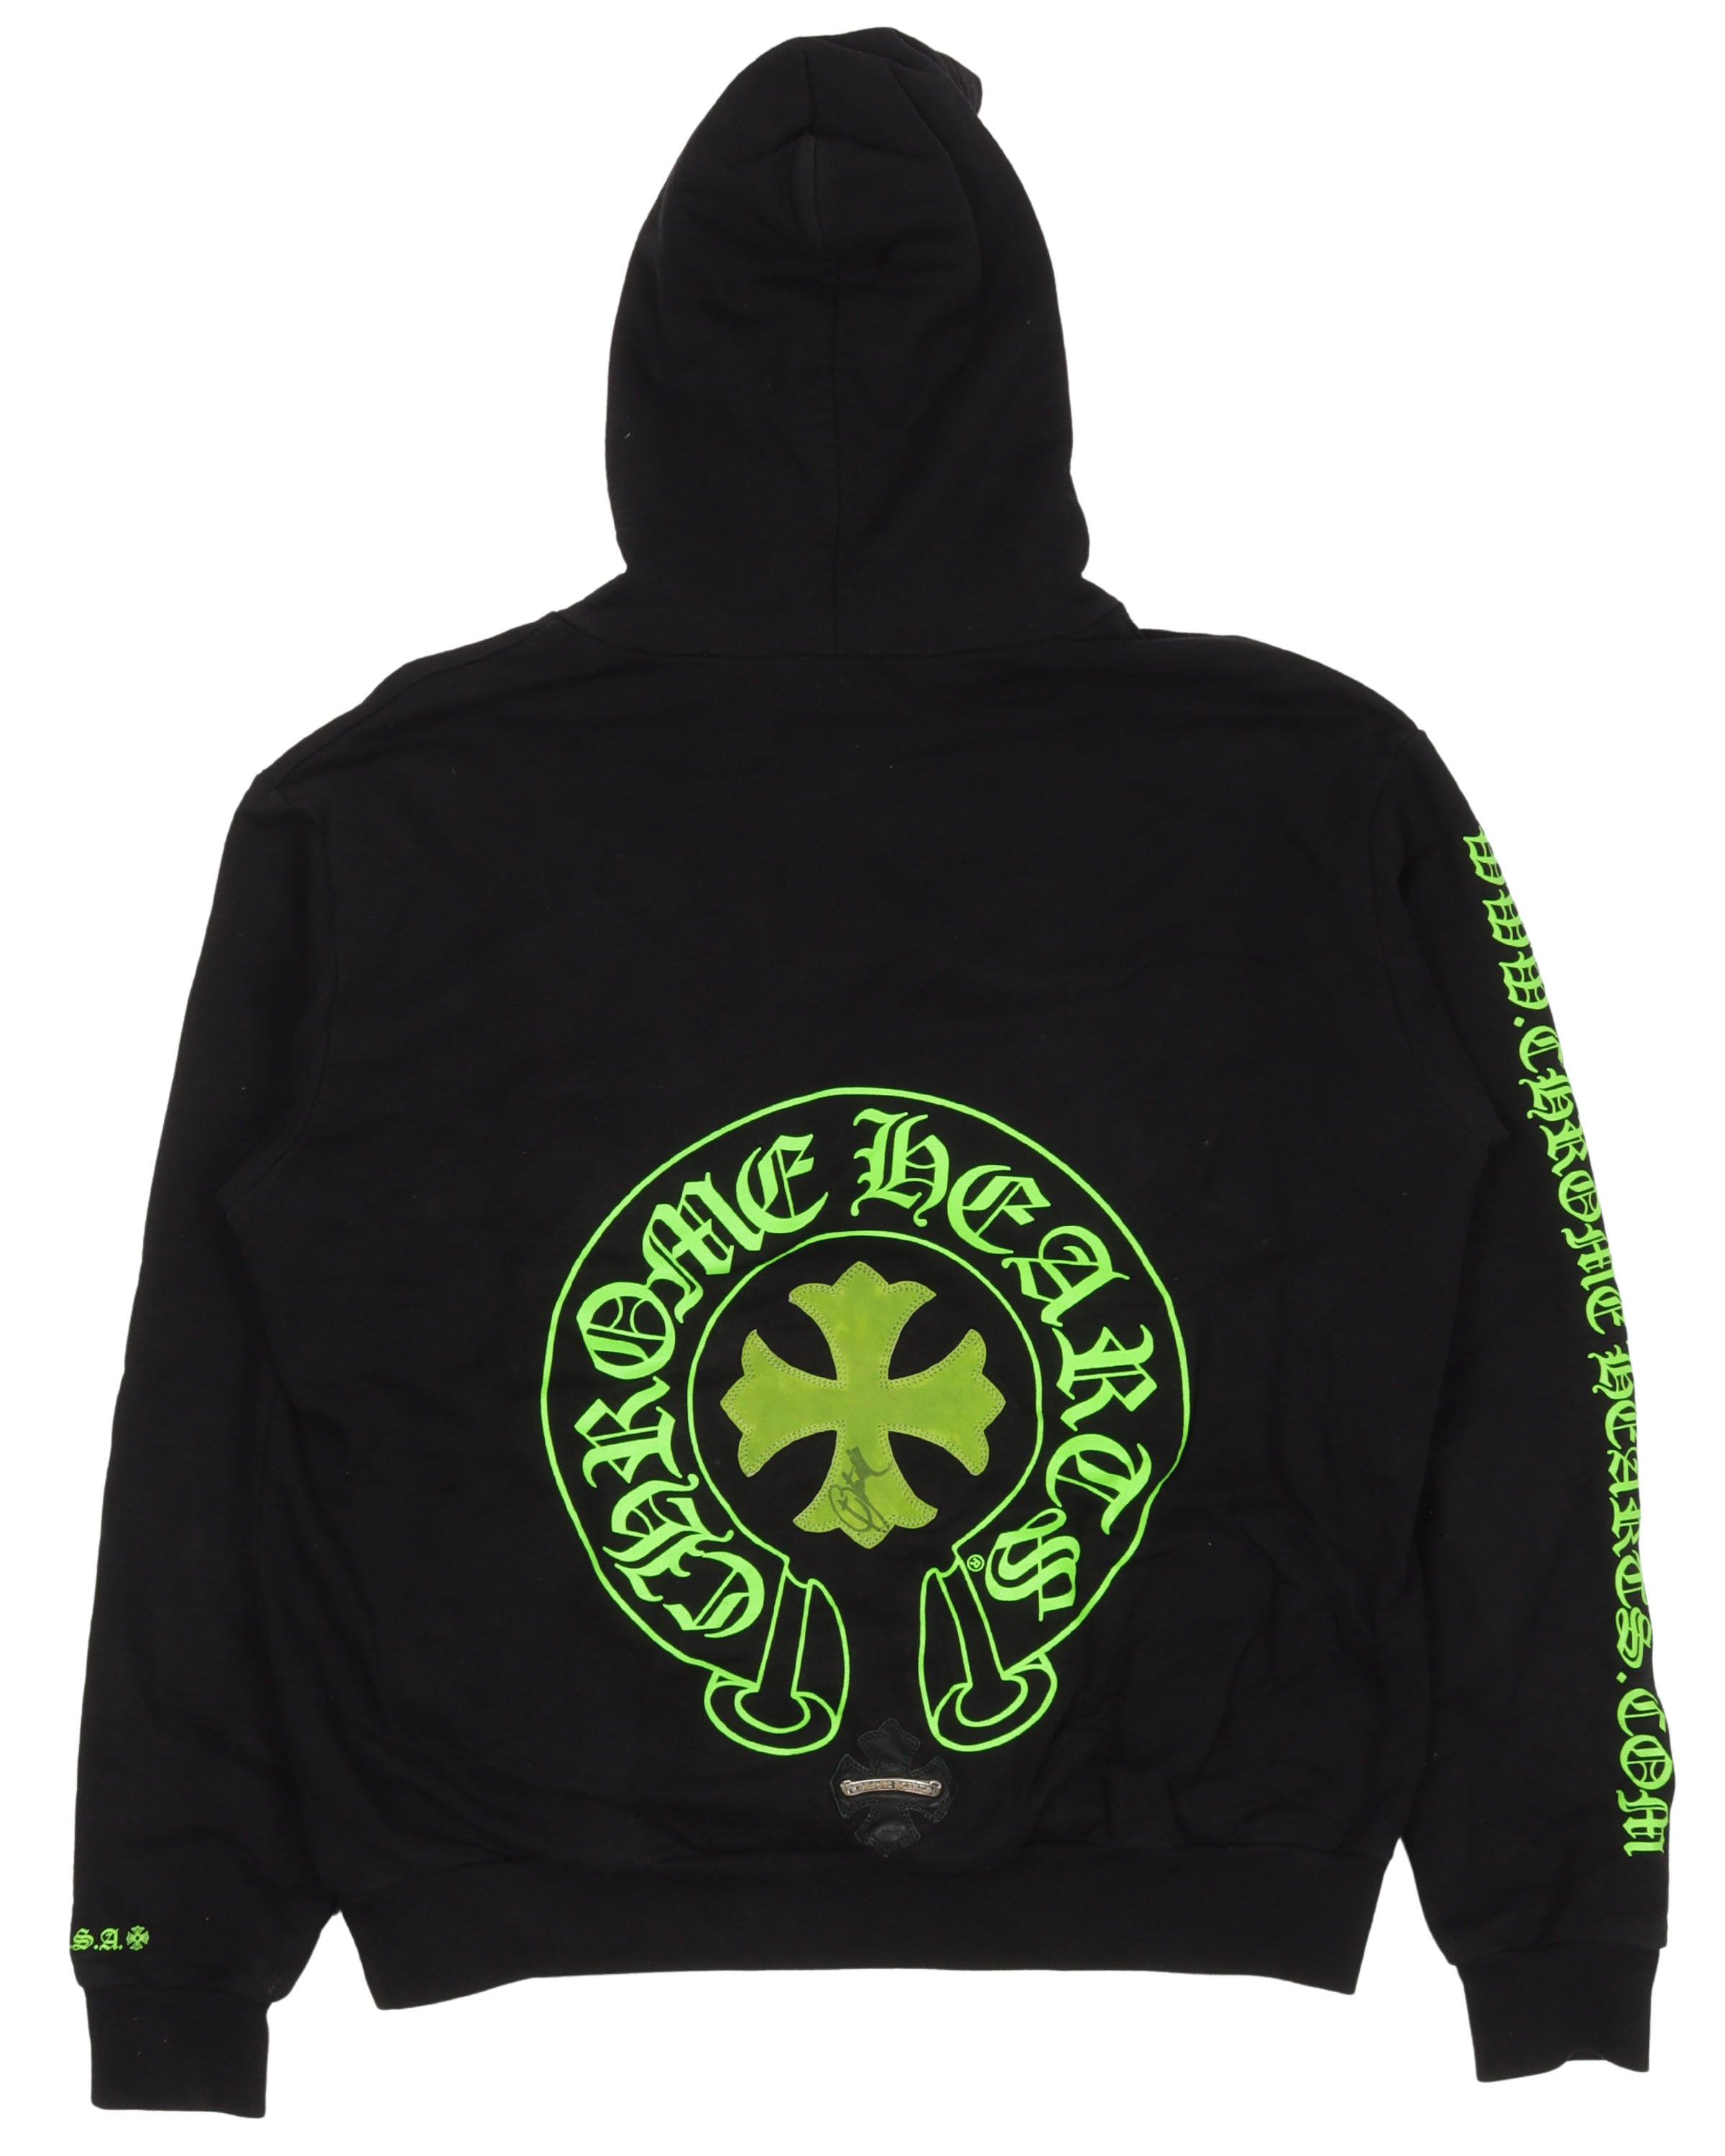 Friends and Family Autographed Hoodie